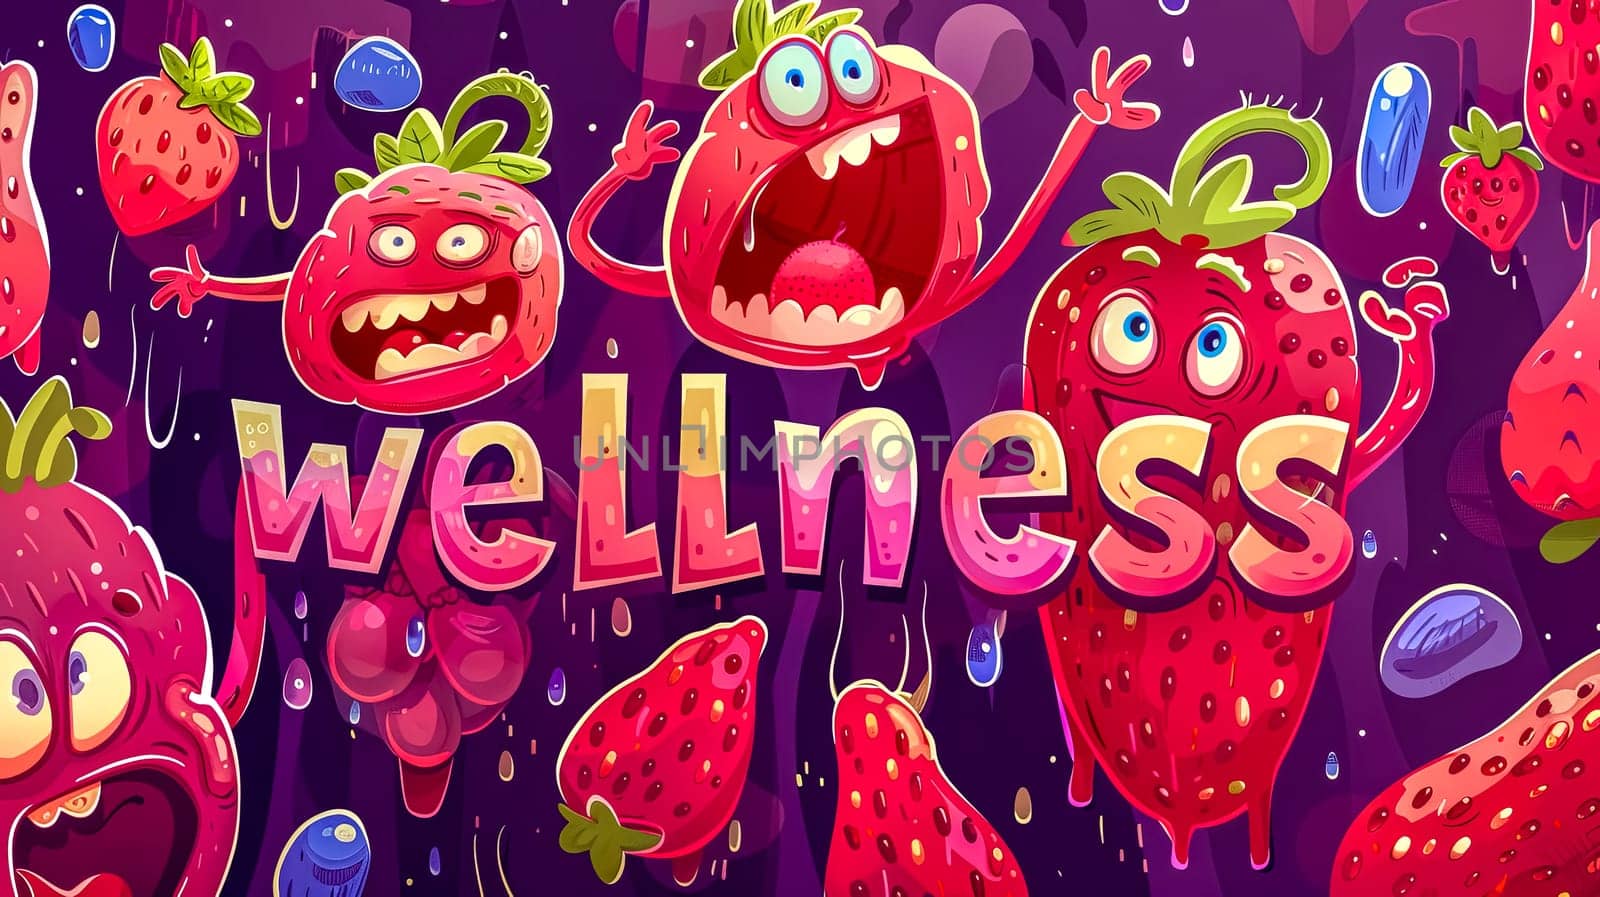 Colorful illustration featuring animated strawberries around a wellness sign